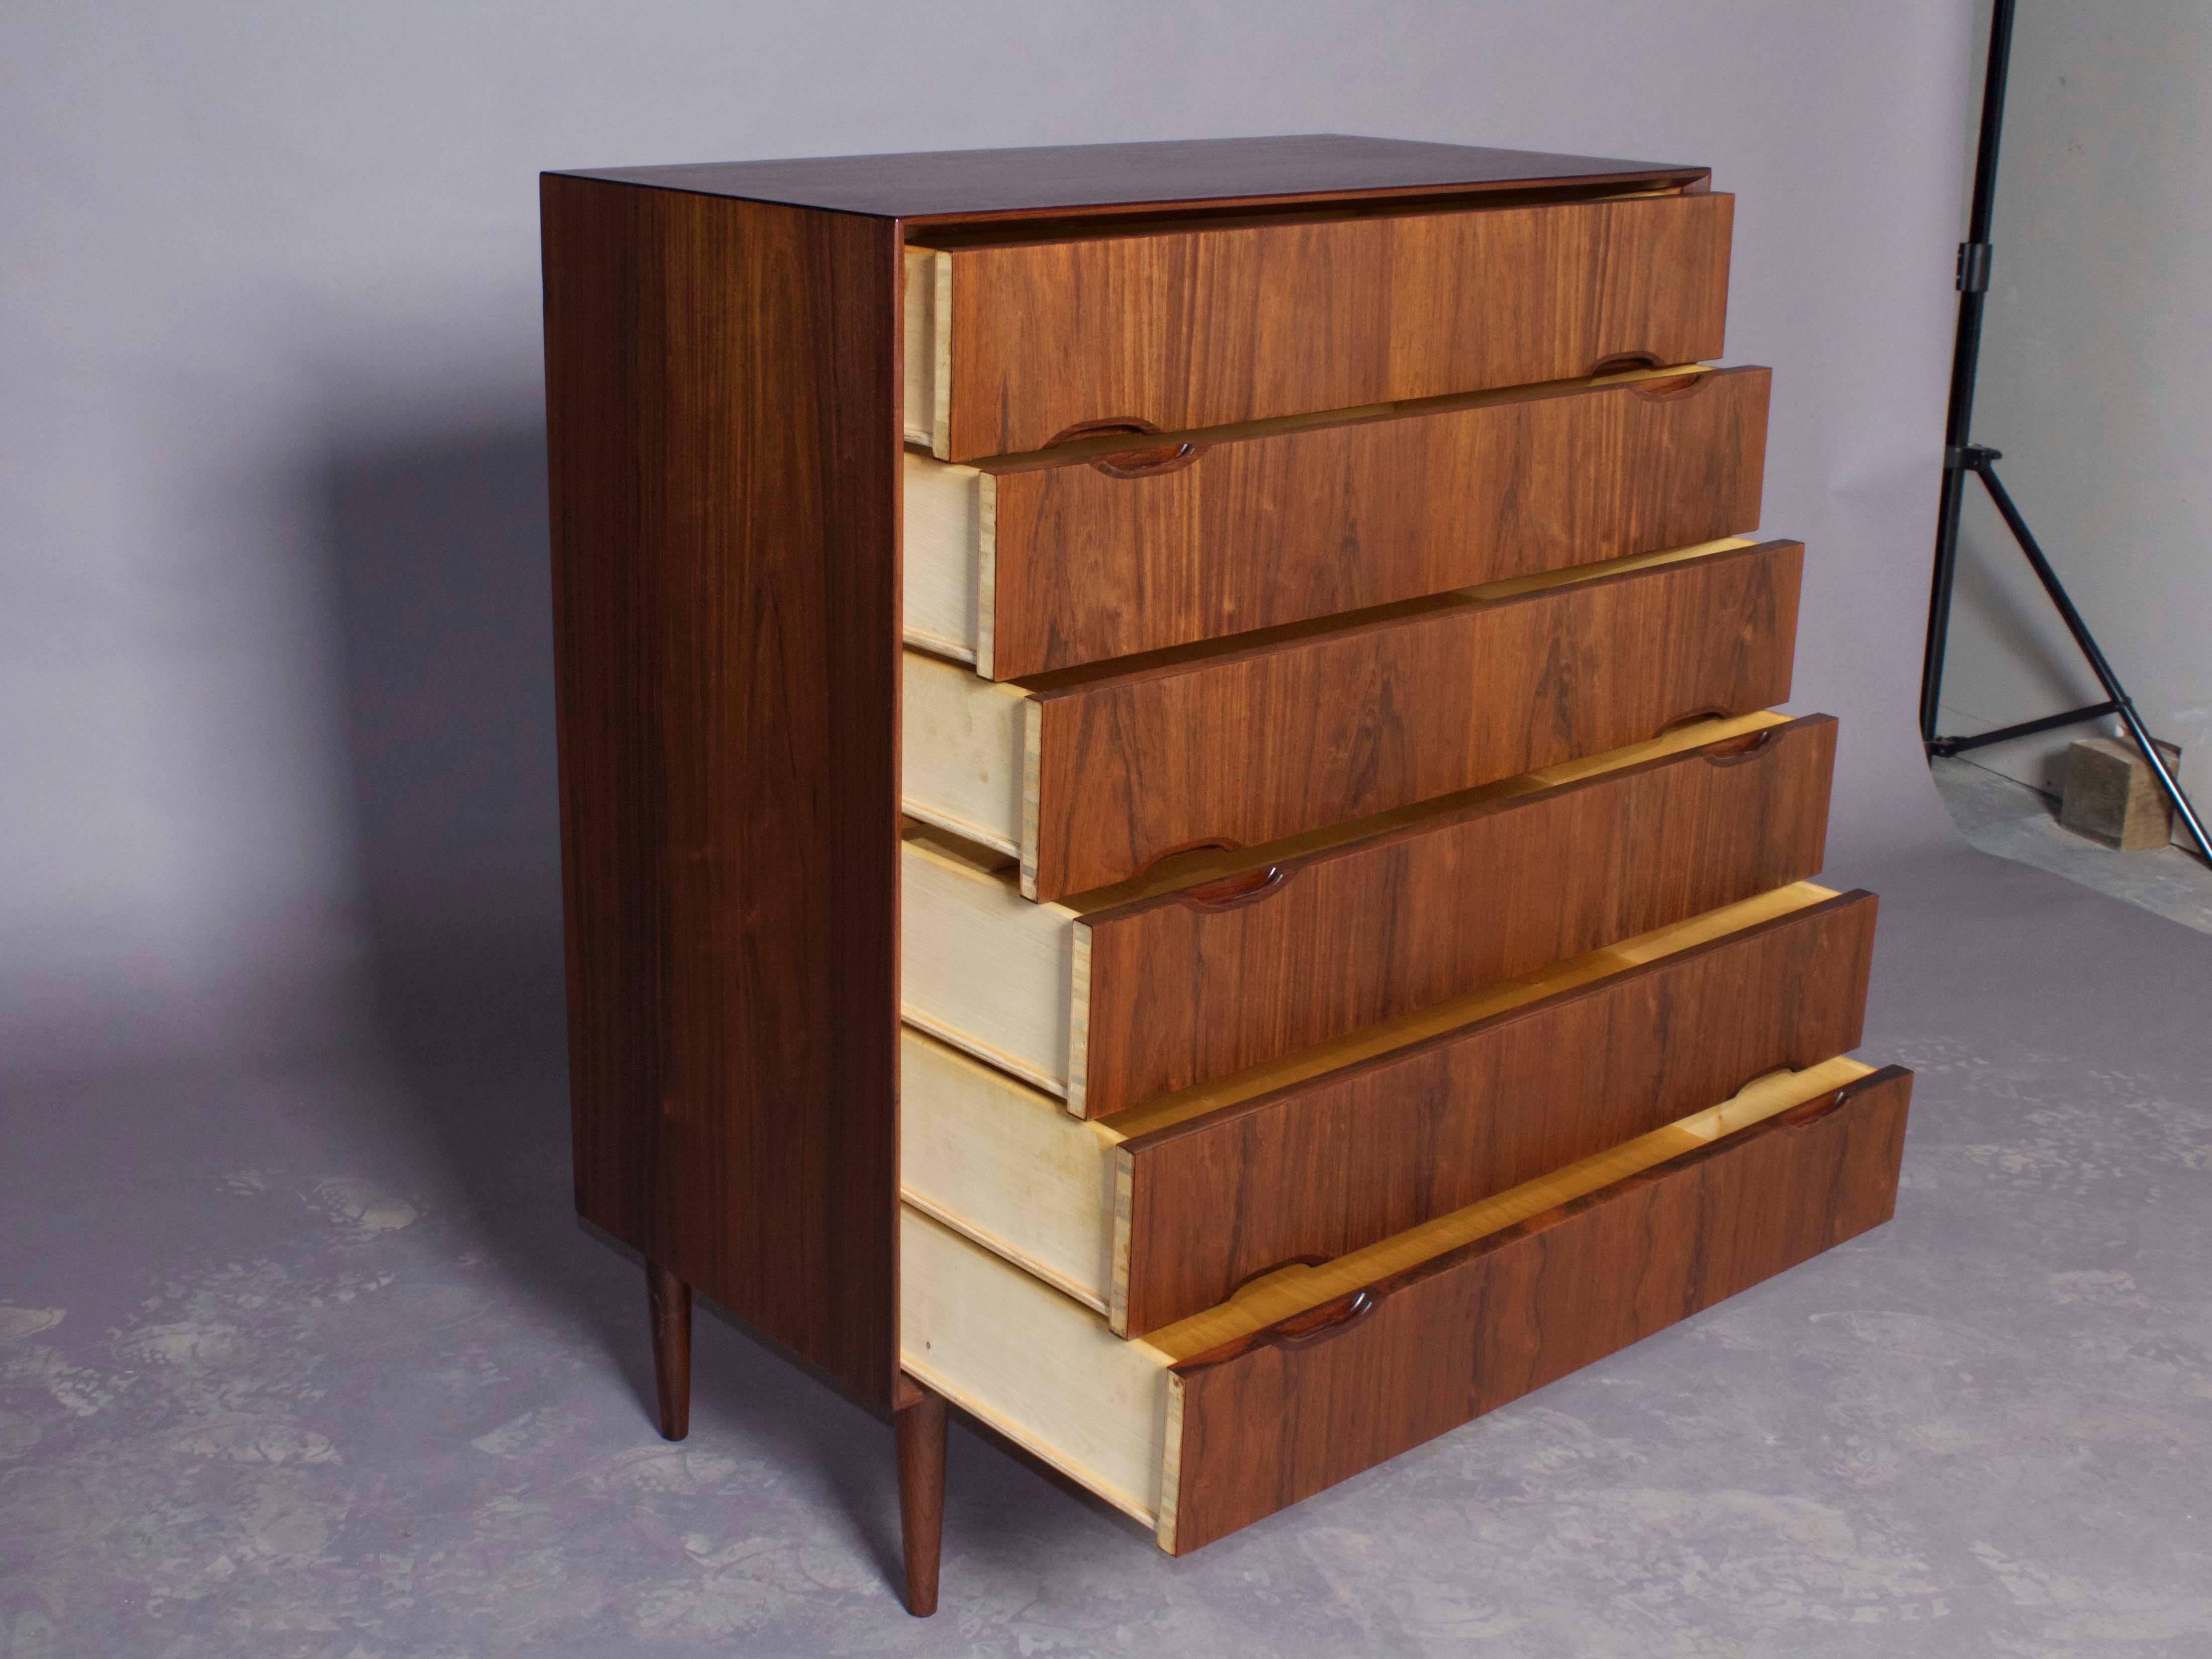 Vintage 1960s rosewood chest of drawers. 

This Danish dresser is in like new condition. Of coarse great for clothing storage in the bedroom but great storage for linens as well. Six drawers. Ready for pick up, delivery, or shipping anywhere in